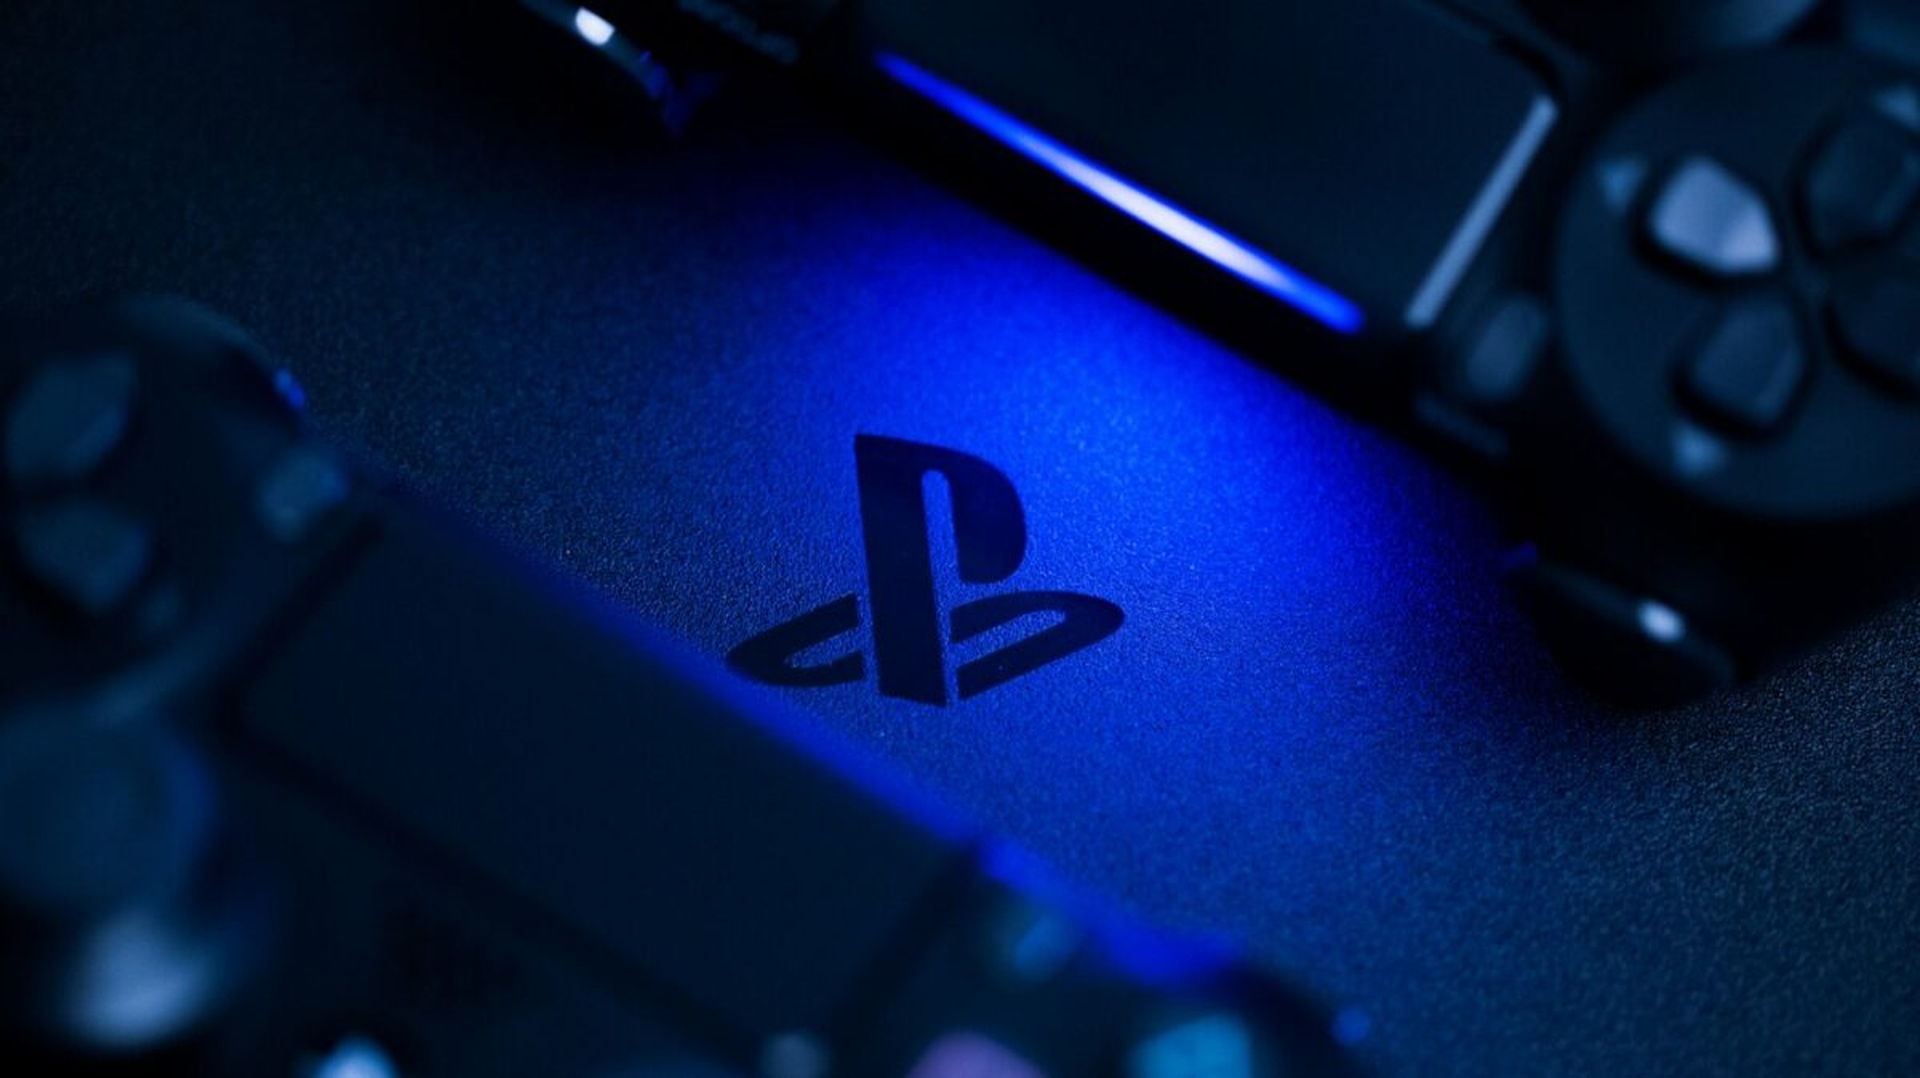 In this article, we are going to go over the best VPN for PS4 and how to use them, so you can secure your console's connection and access geo-locked content.